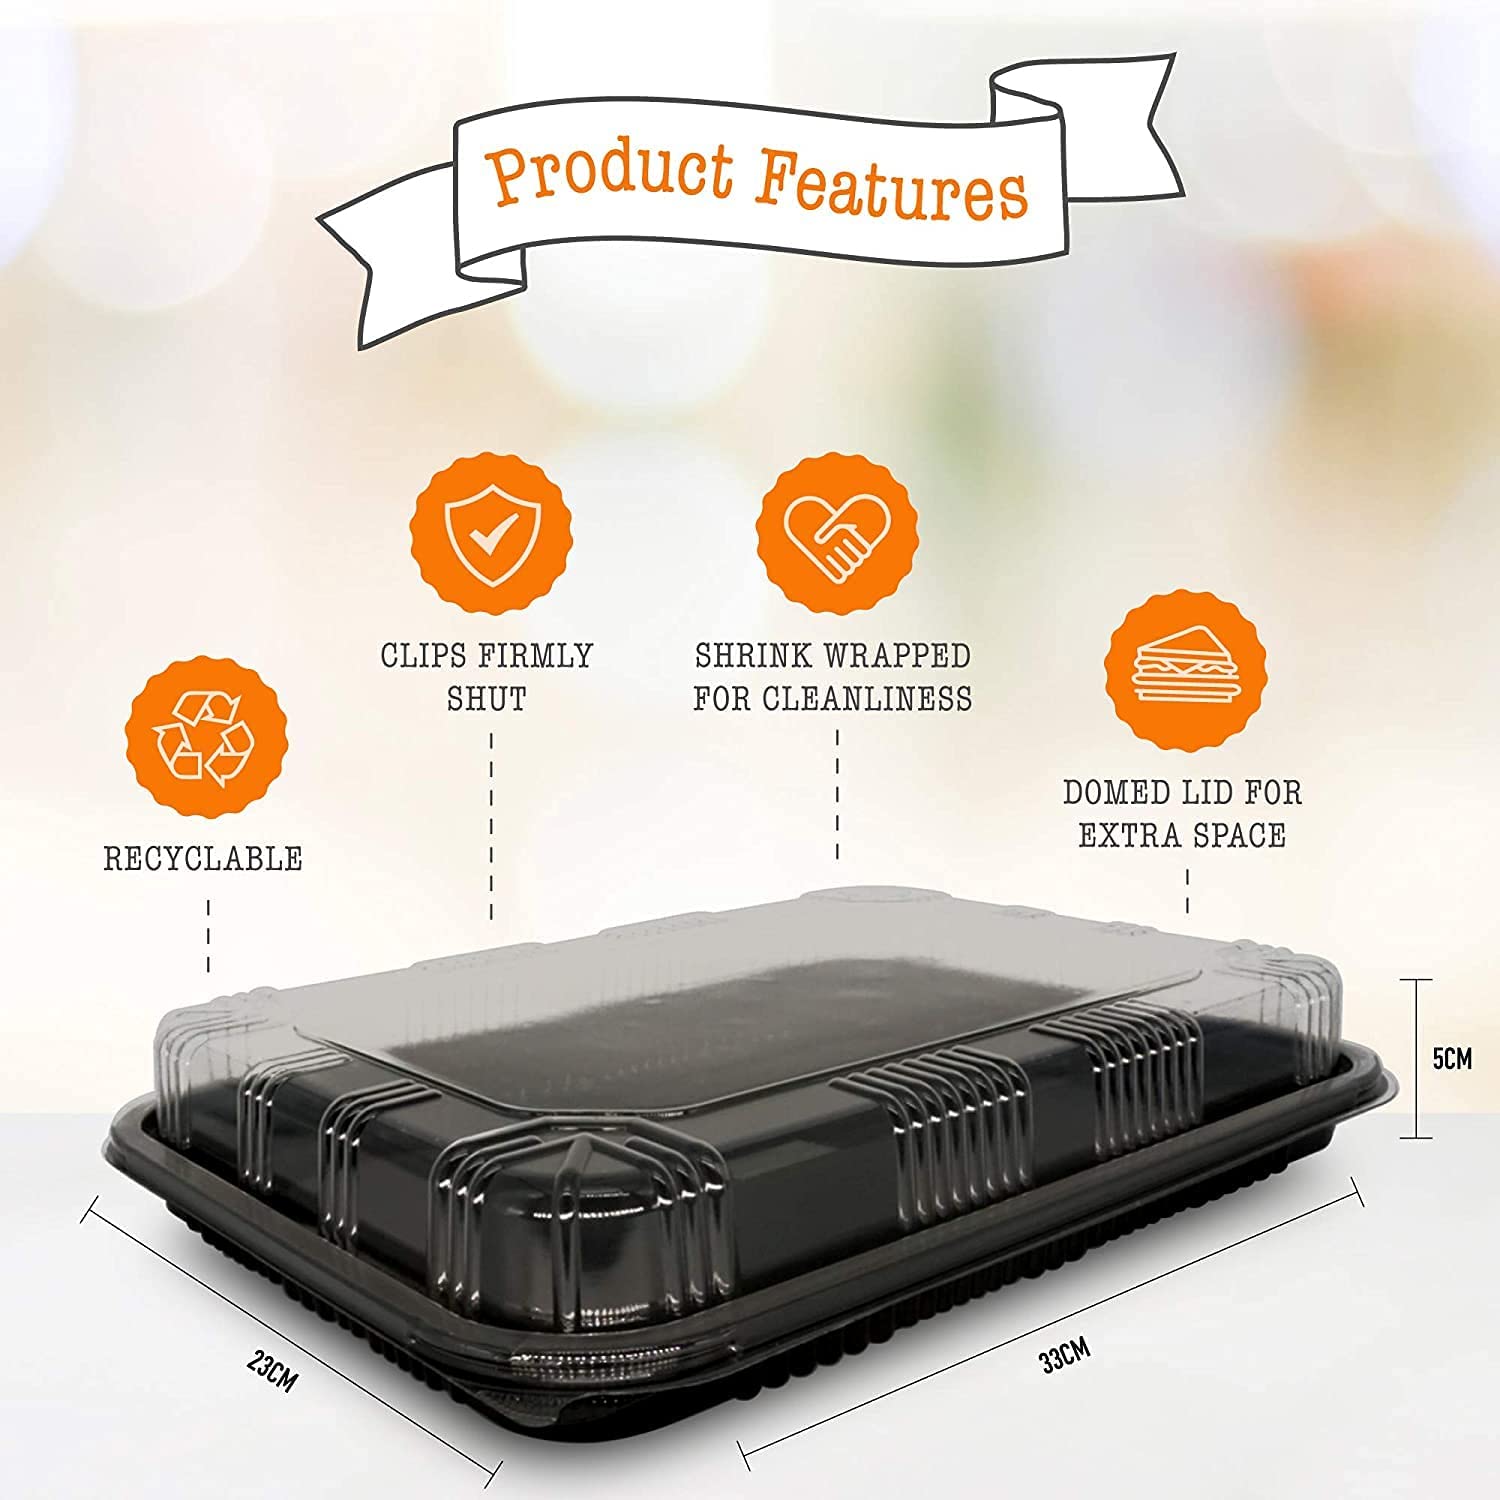 Product features of the sandwich trays with lids